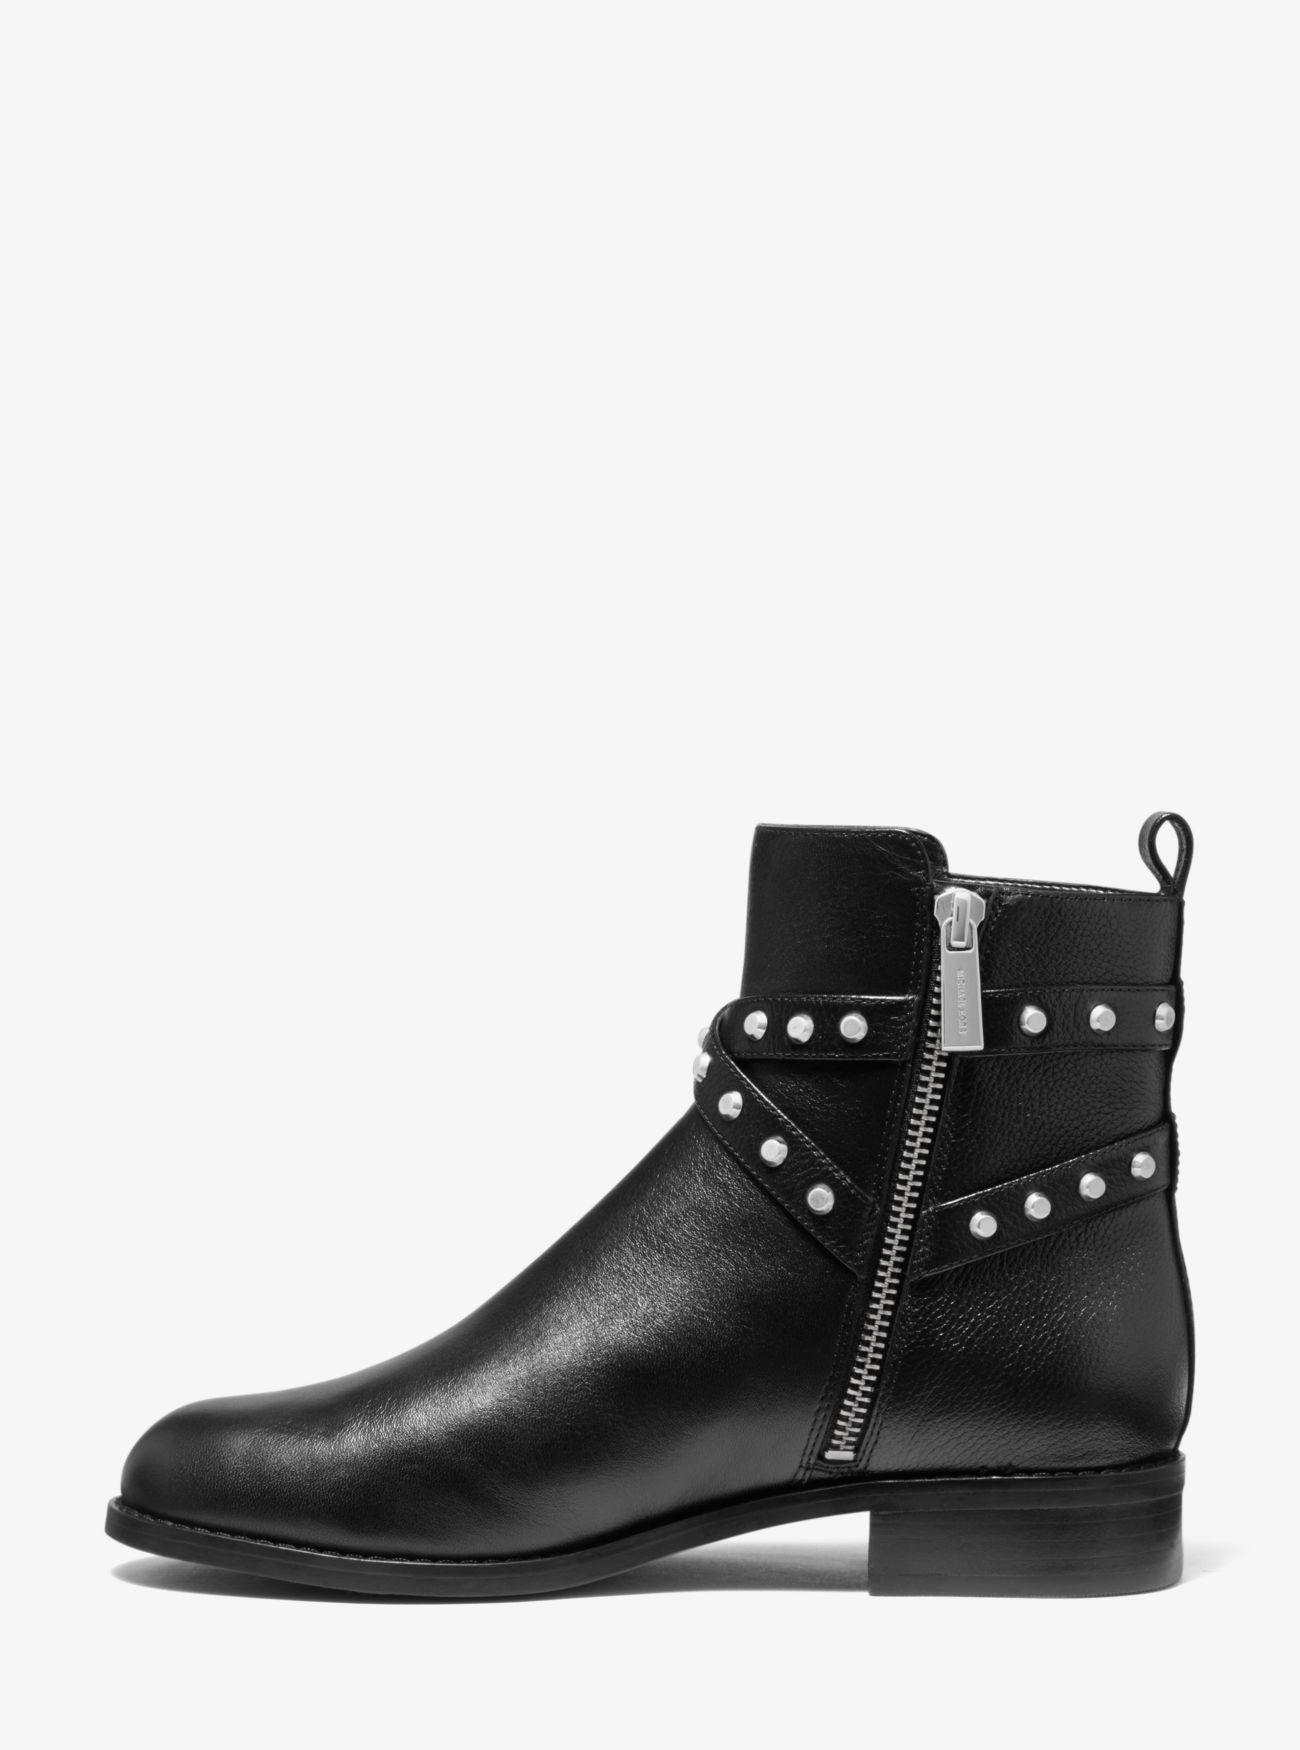 MICHAEL Michael Kors Preston Studded Leather Ankle Boot in Black - Lyst